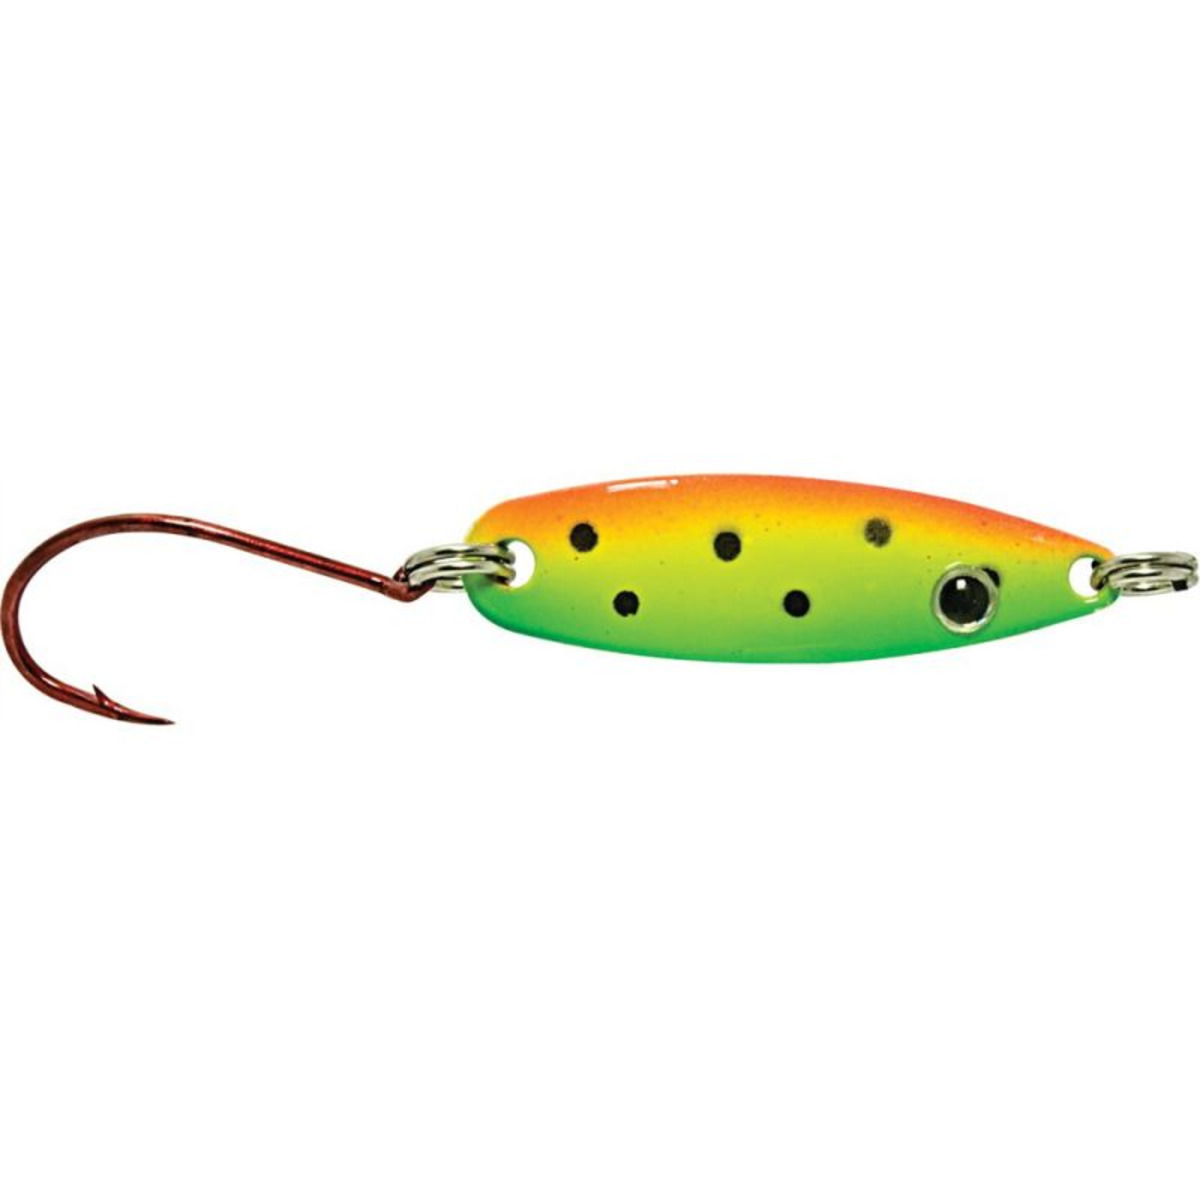 Rapture Silver Trout - 4.0 g - 43 mm - 10 - FT